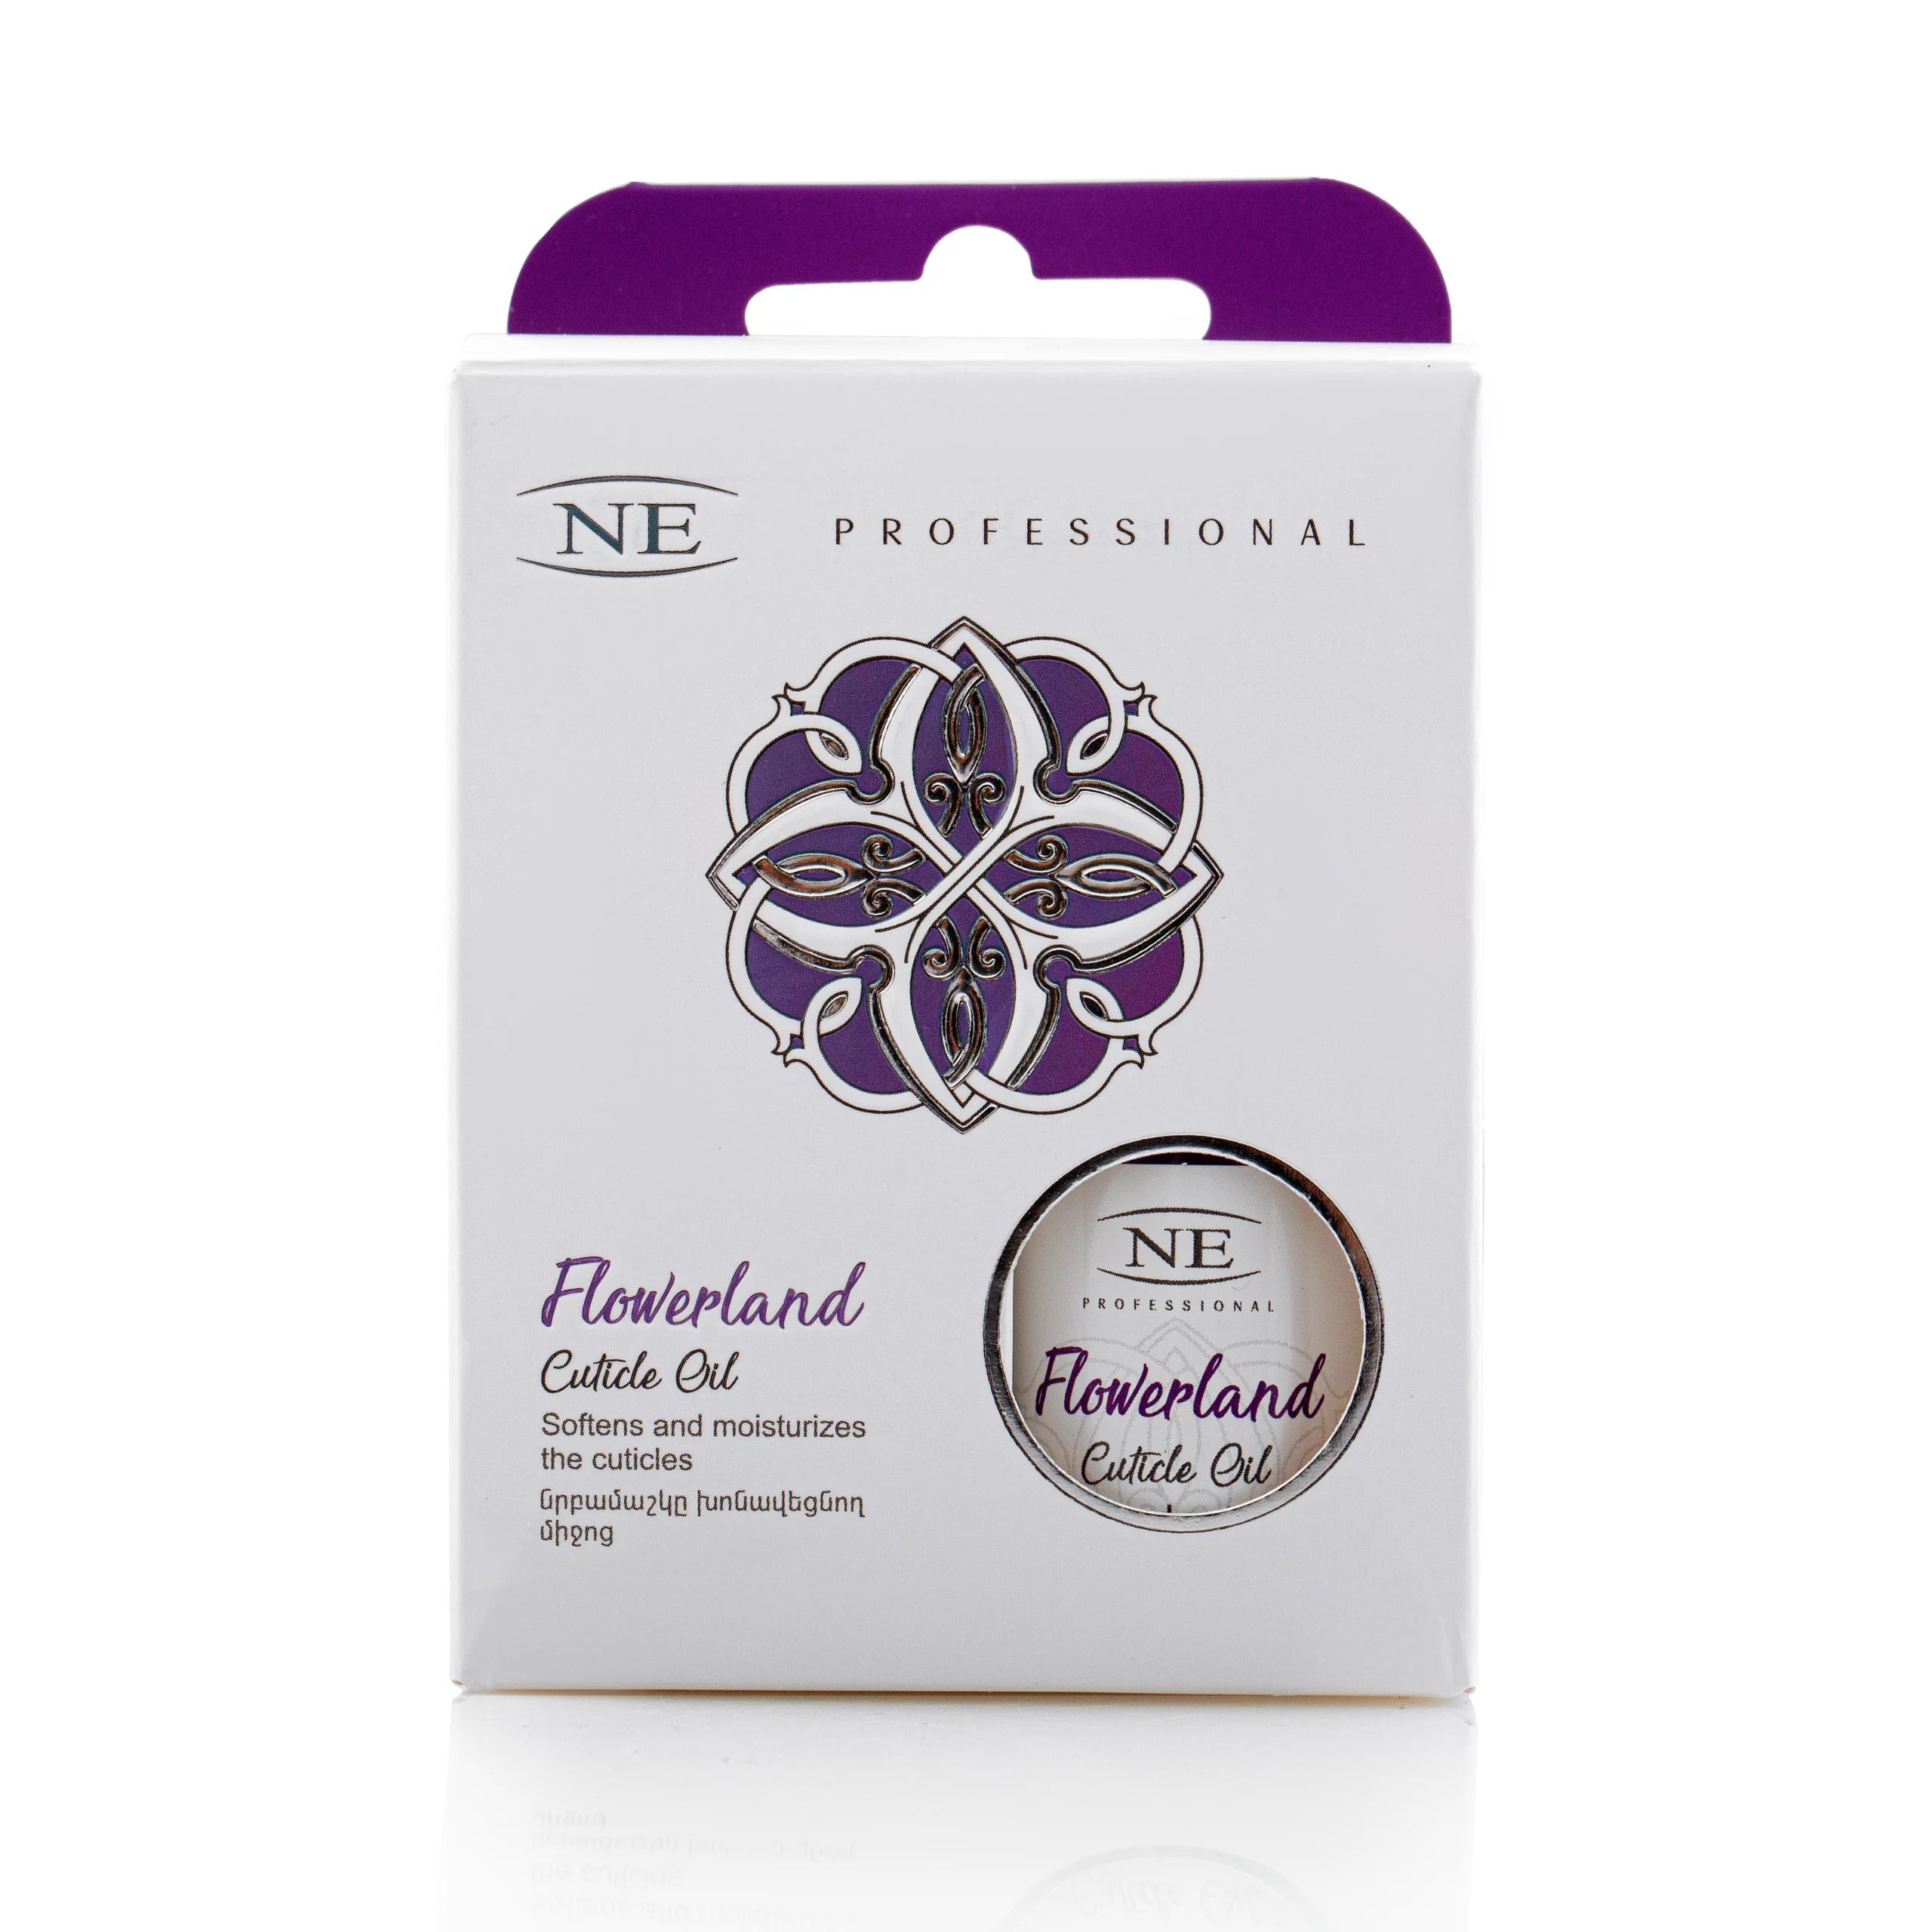 Flowerland Cuticle Oil by NE Professional